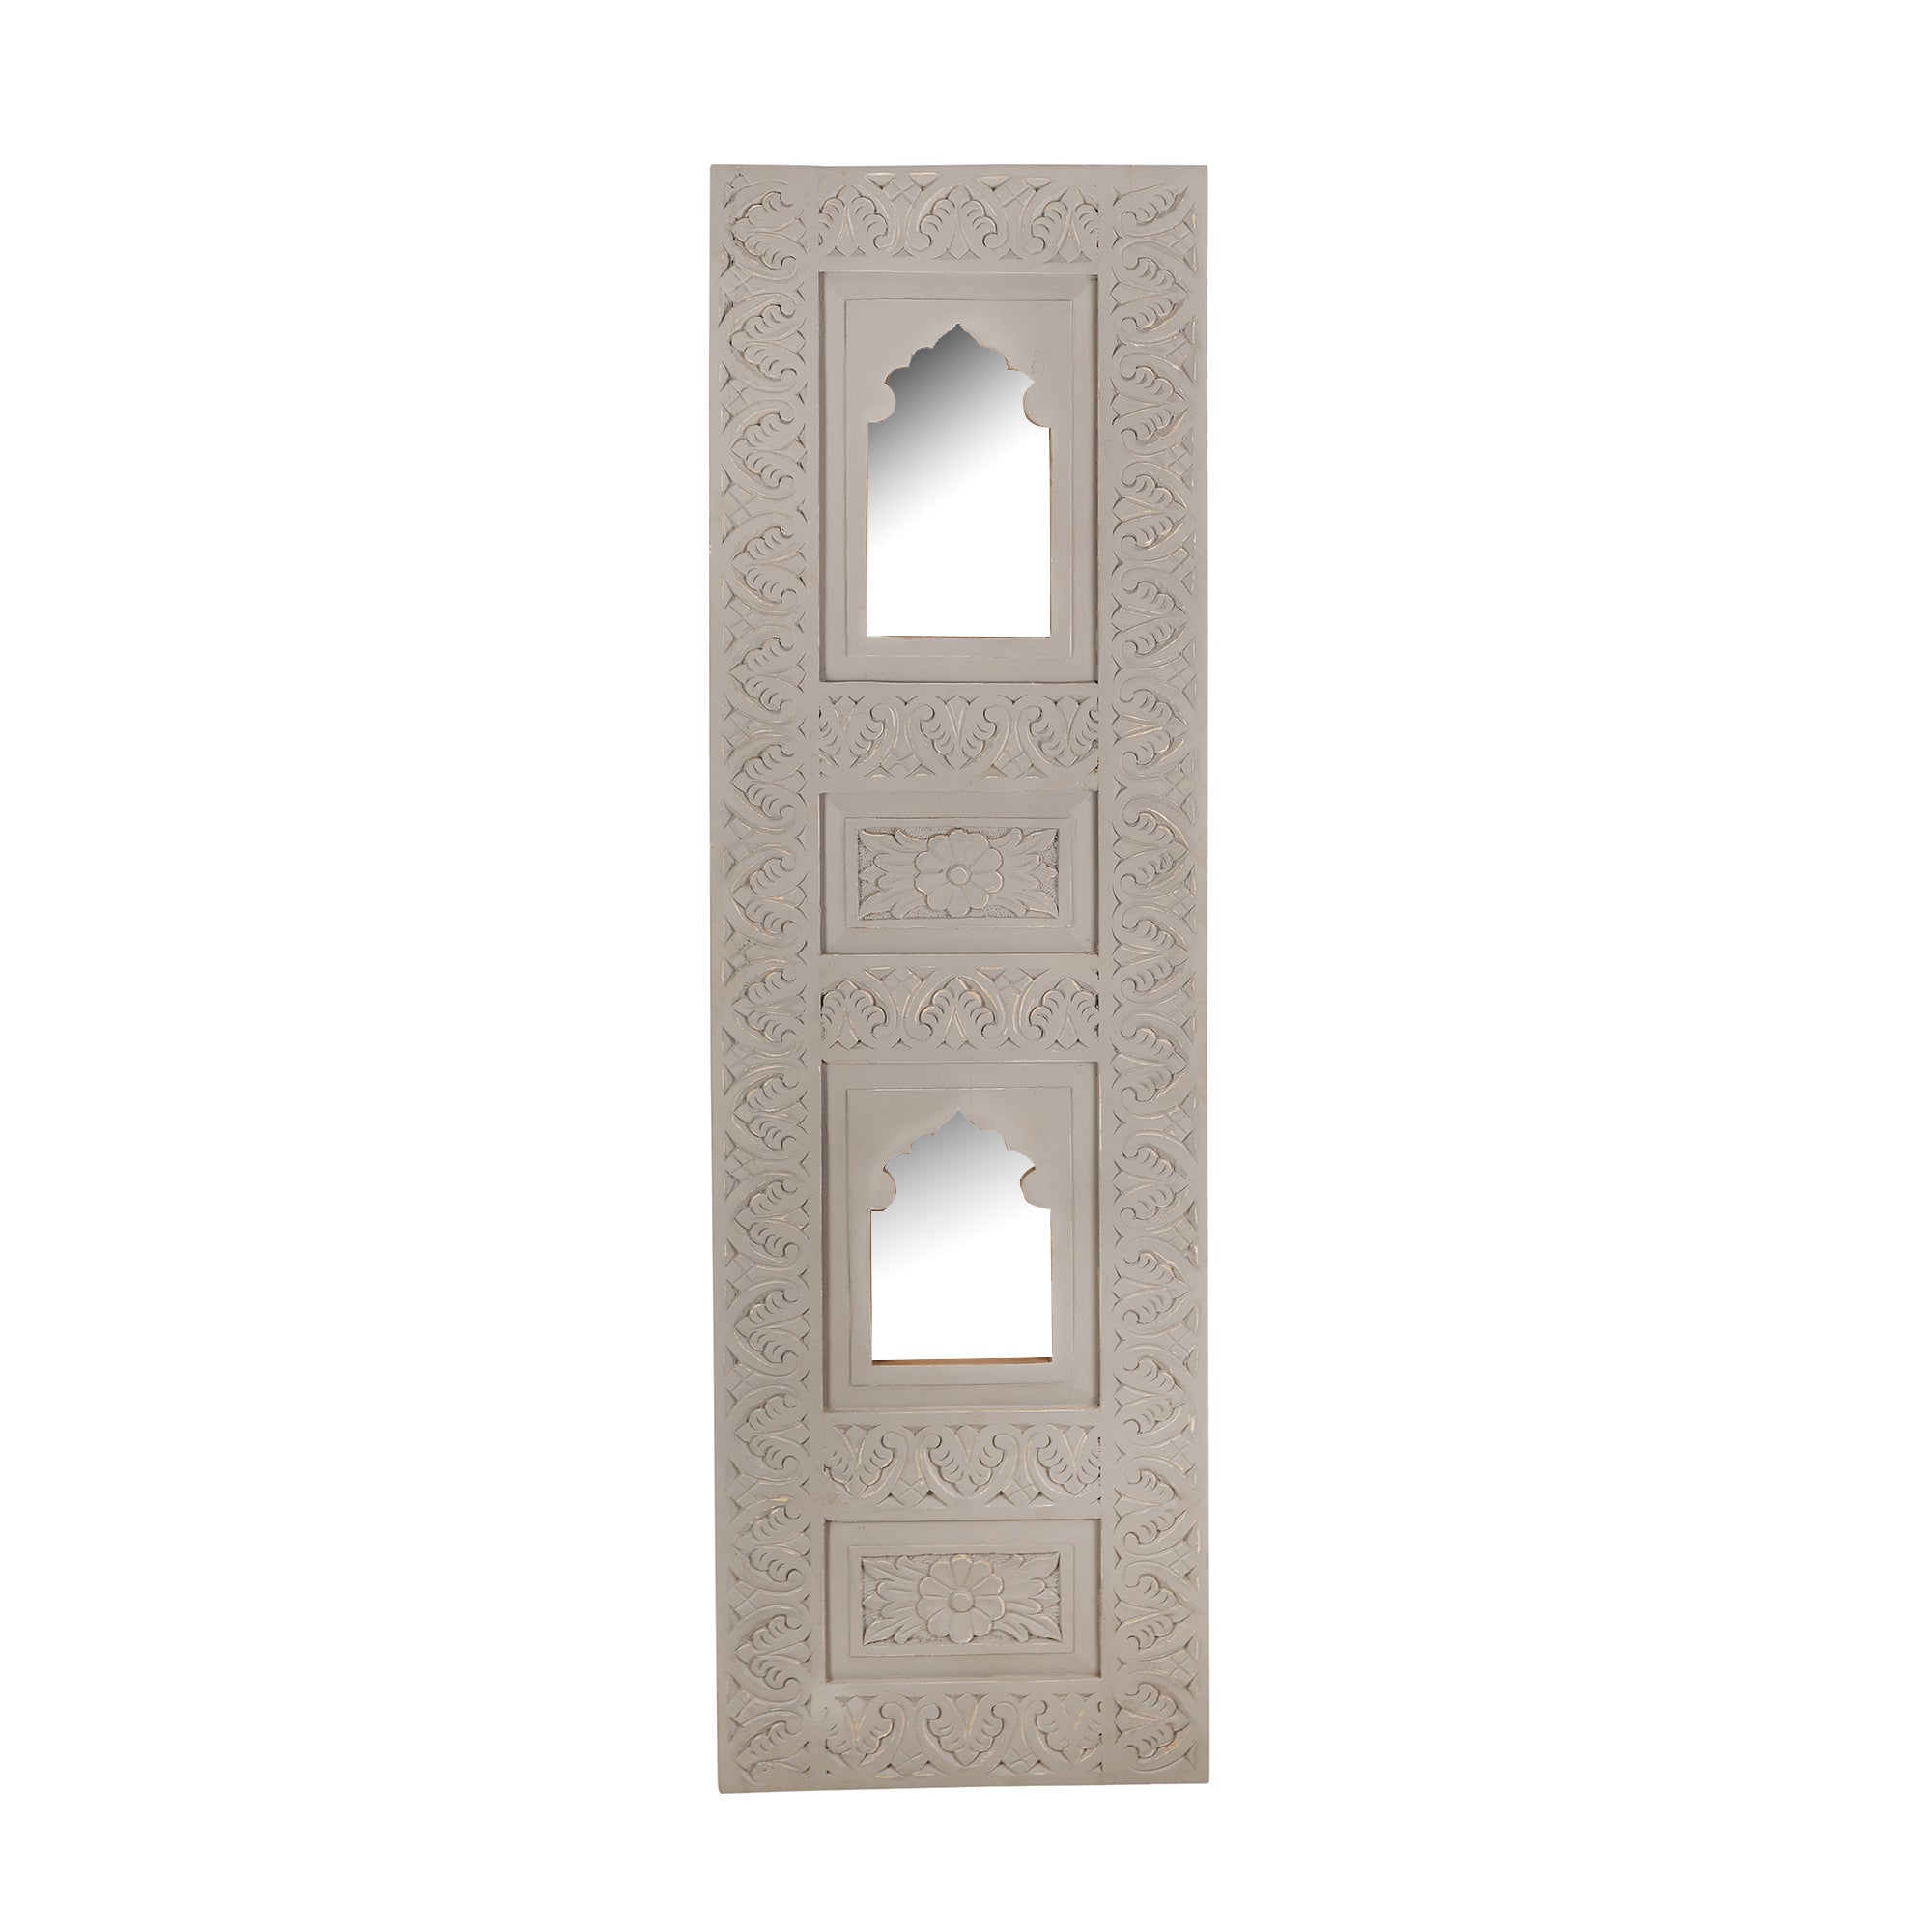 Alankrit Hand Carved Wall Mirror